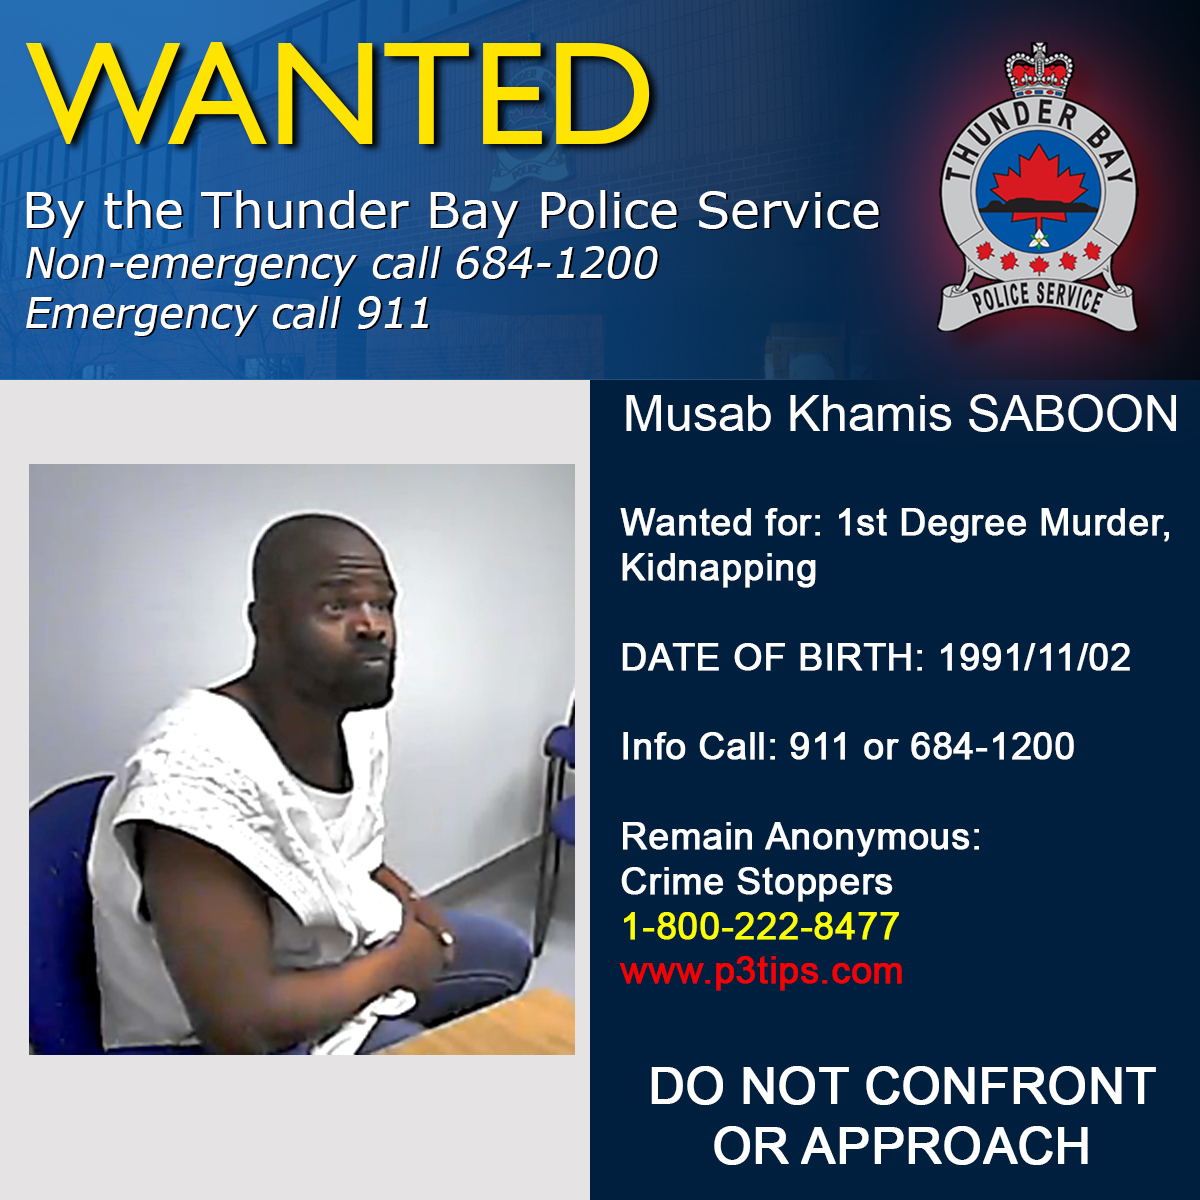 Second Suspect Arrested, CanadaWide Warrant Issued for Third in